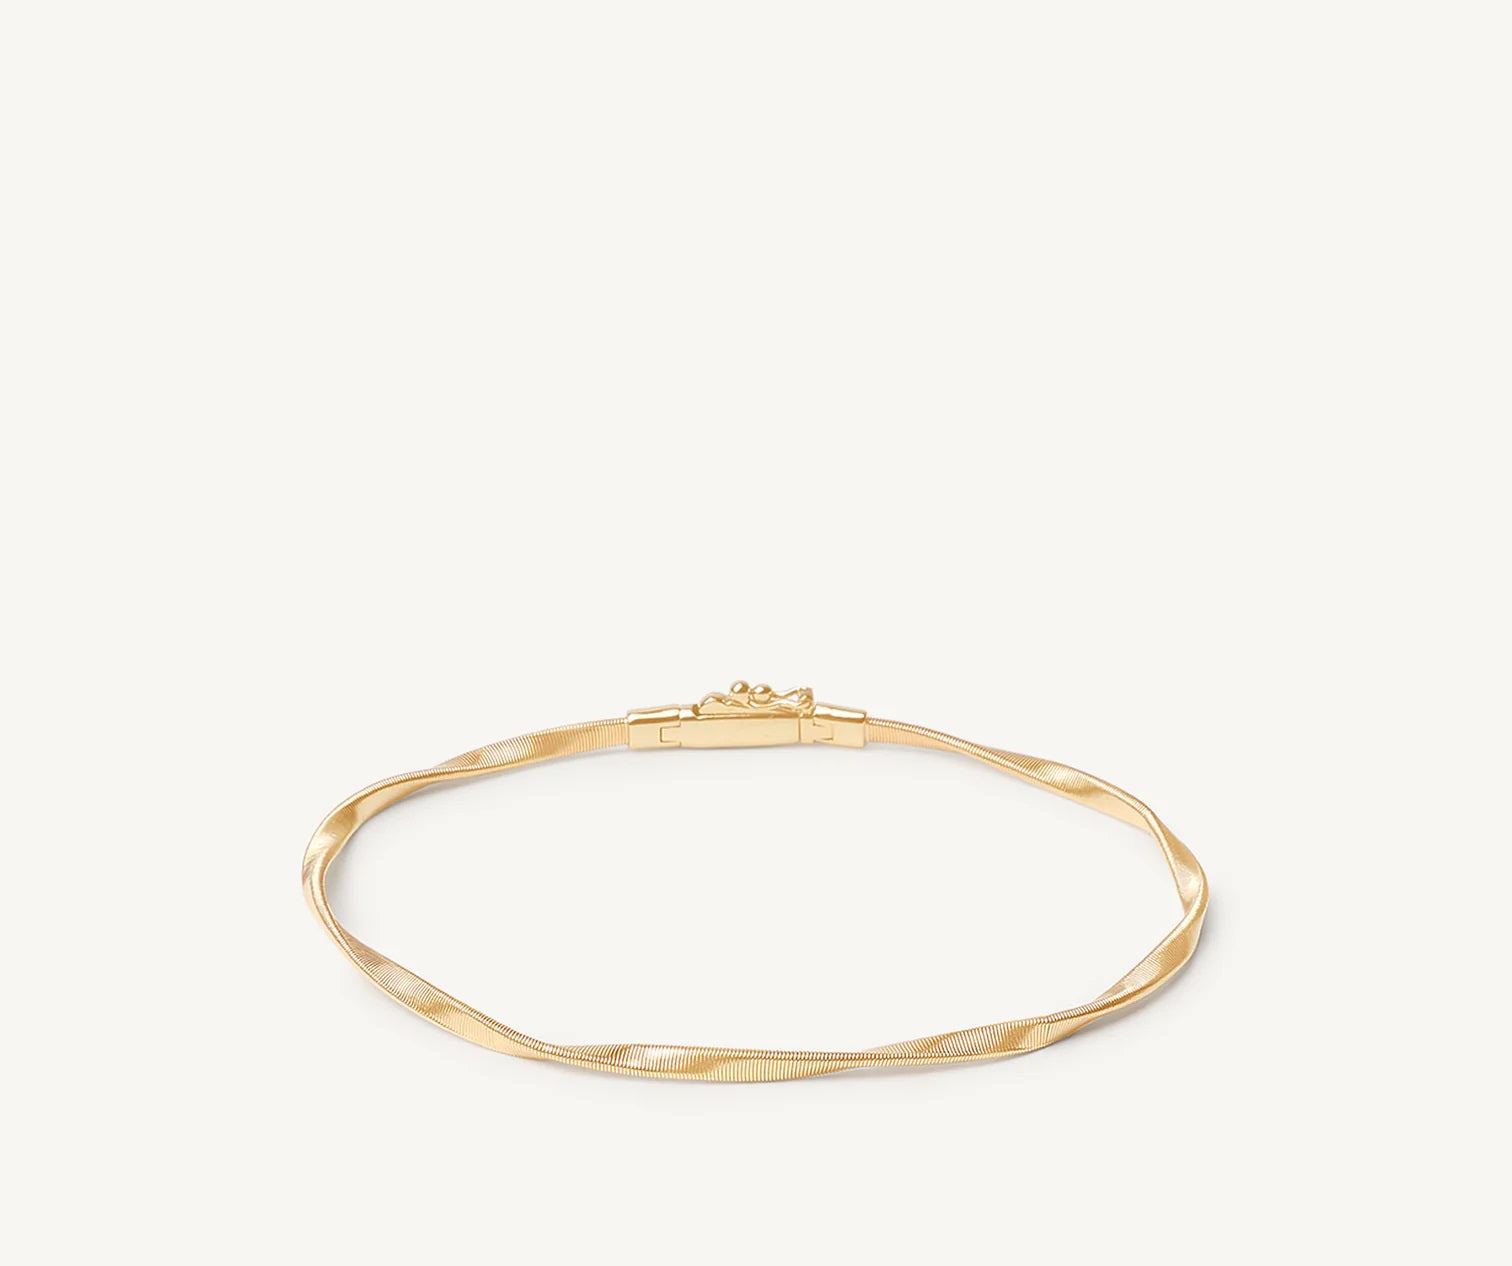 18K YELLOW GOLD TWISTED COIL BRACELET FROM THE MARRAKECH COLLECTION